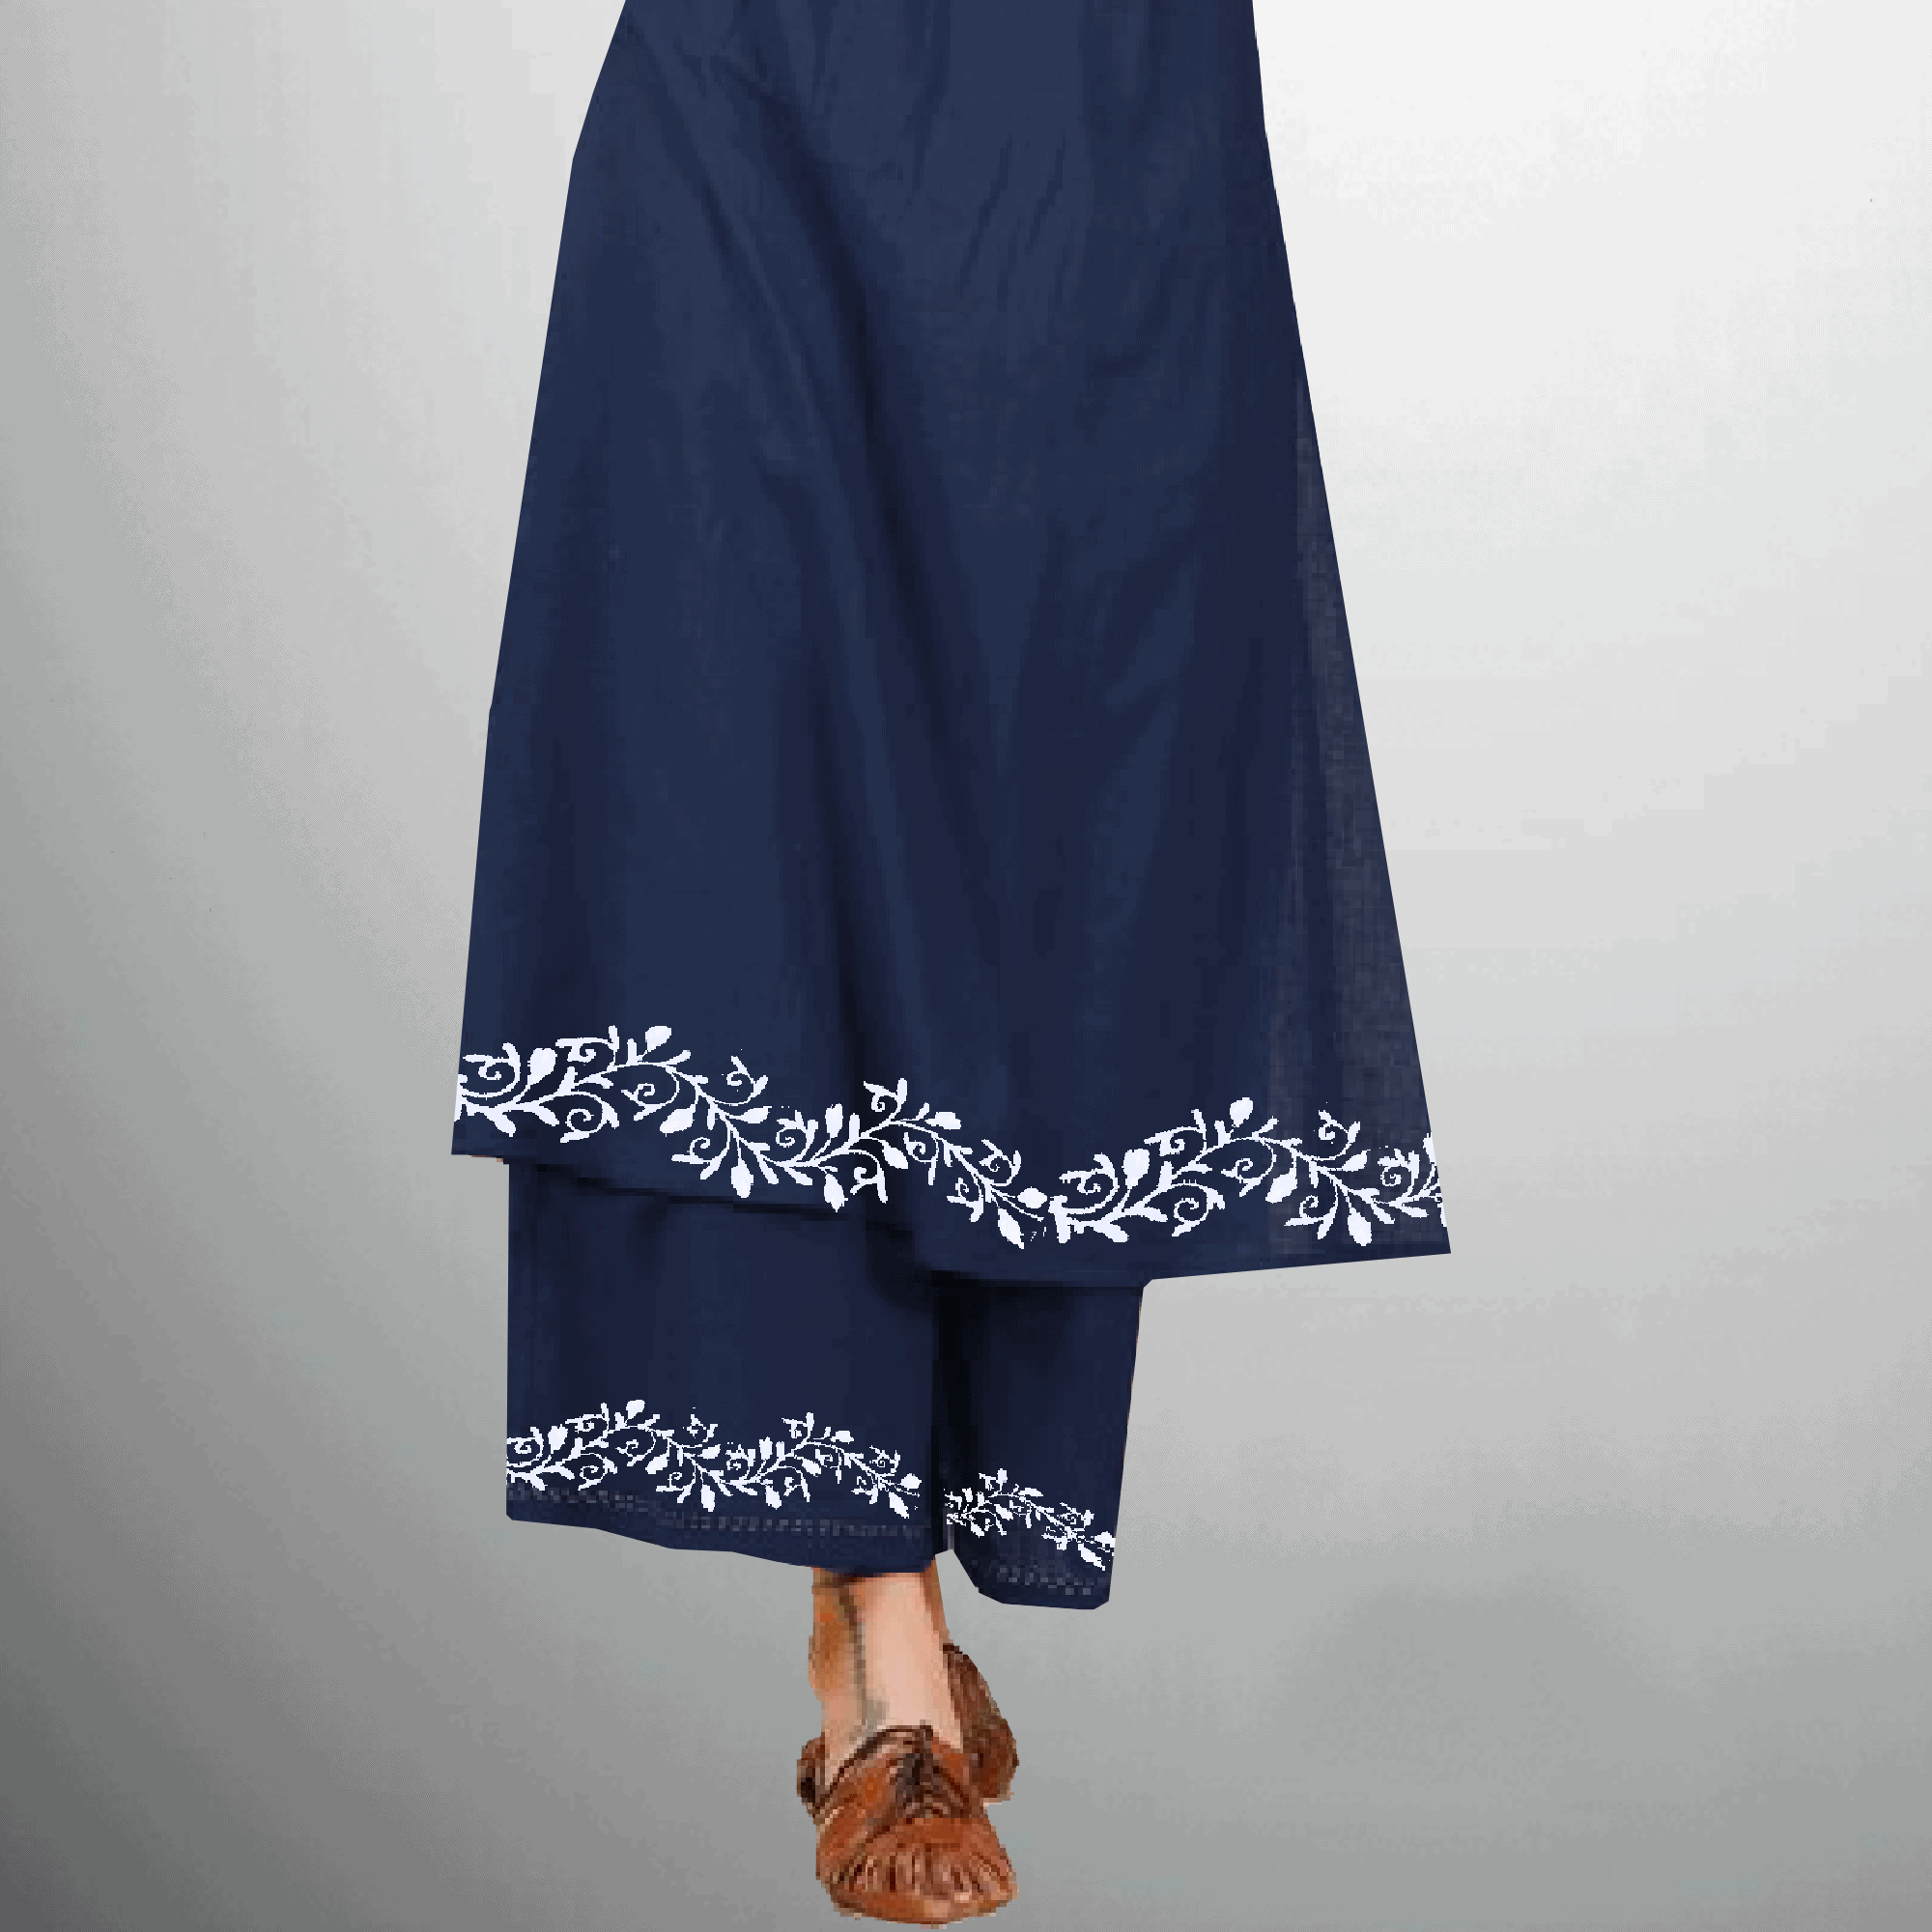 Women's Halter neck Blue kurti with front Embroidery and Hand Painting-RWKS044